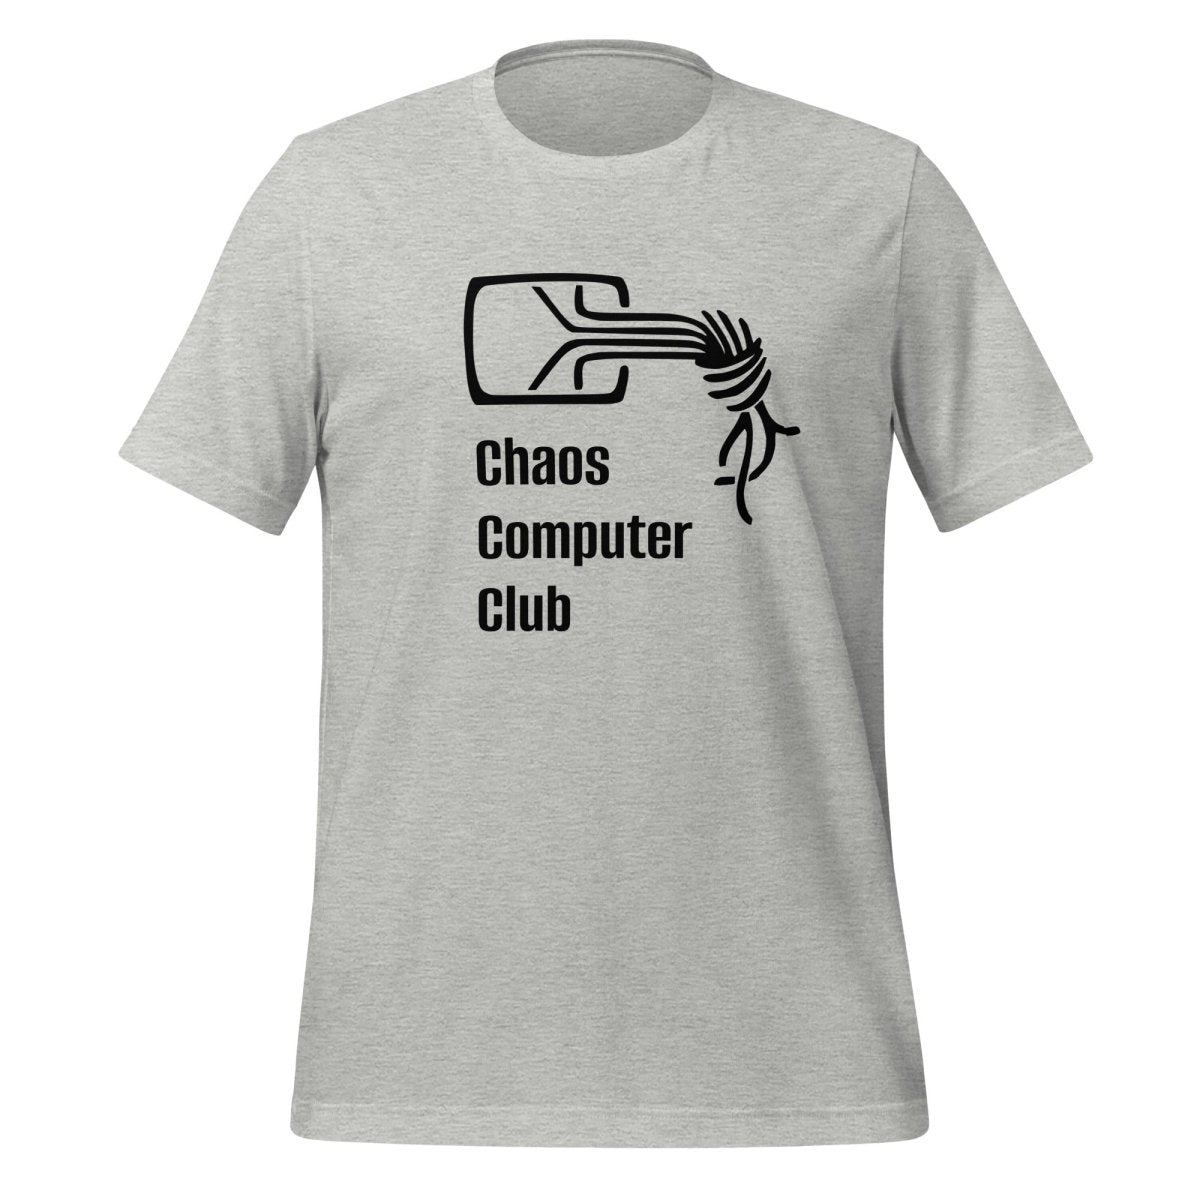 Chaos Computer Club Light T - Shirt (unisex) - Athletic Heather - AI Store